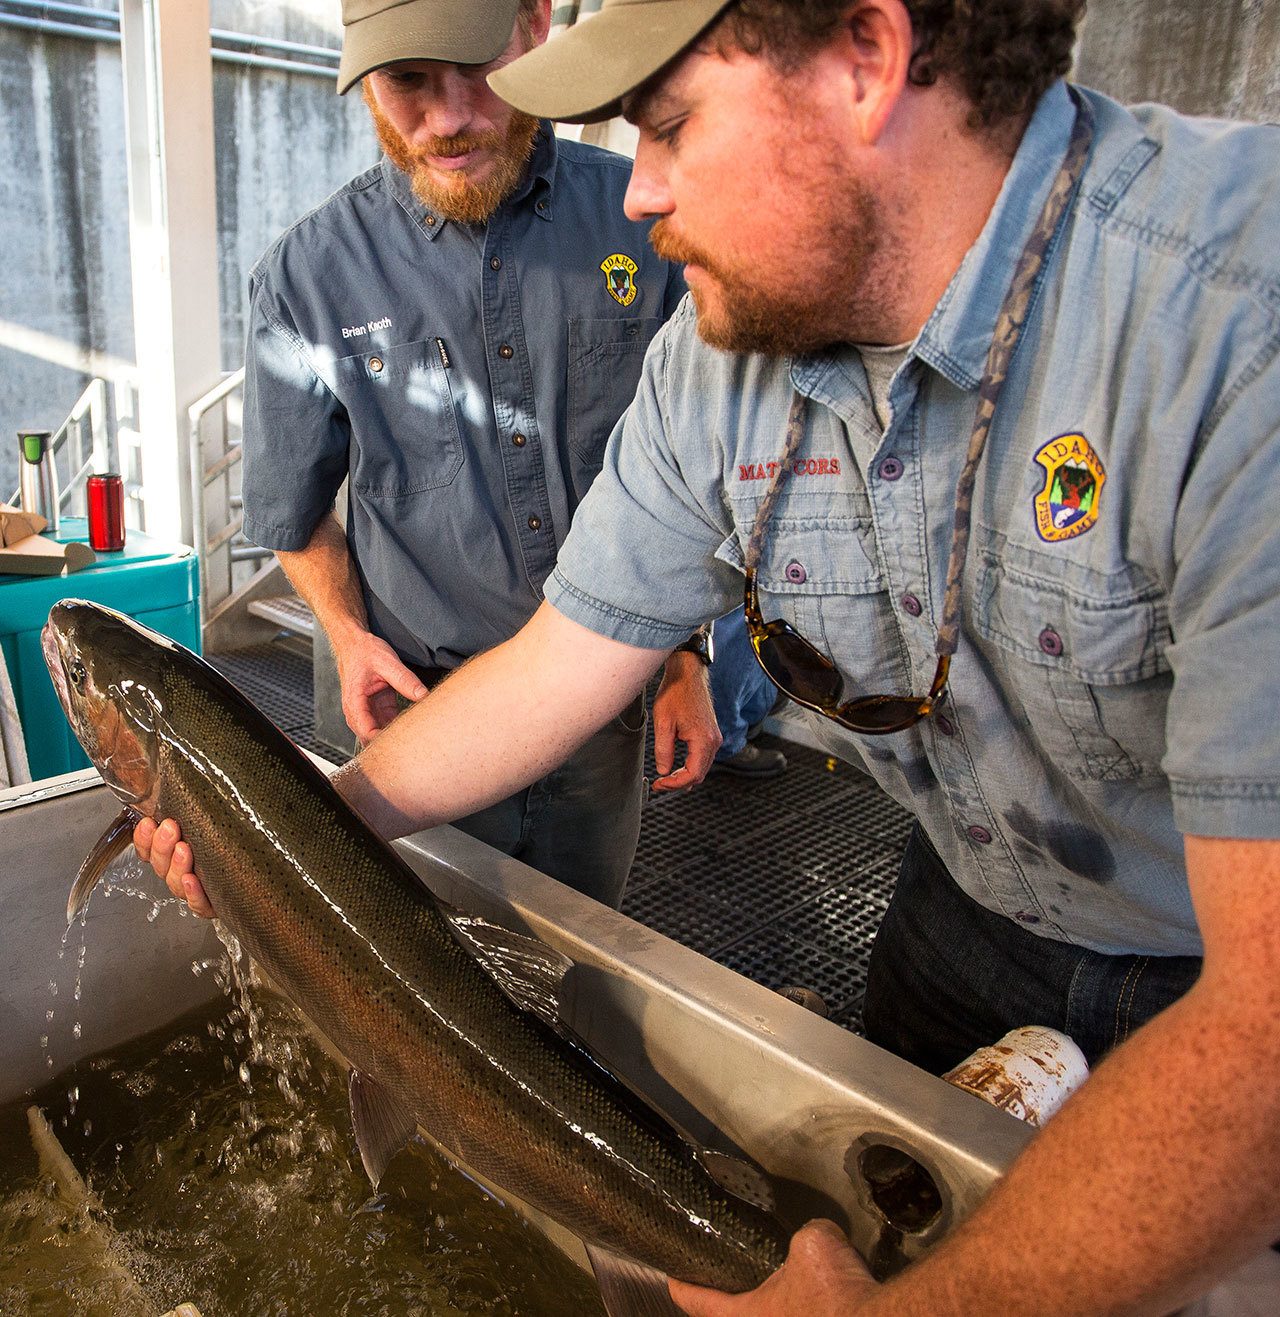 Matt Corsi, right, and Brian Knoth, left, both fisheries biologists with the Idaho Department of Fish and Game, examine a steelhead lifted from the data recording tank in September 2014 at the Lower Granite Dam fish facility on the Snake River in Washington state. (Dean Hare/The Moscow-Pullman Daily News via AP)